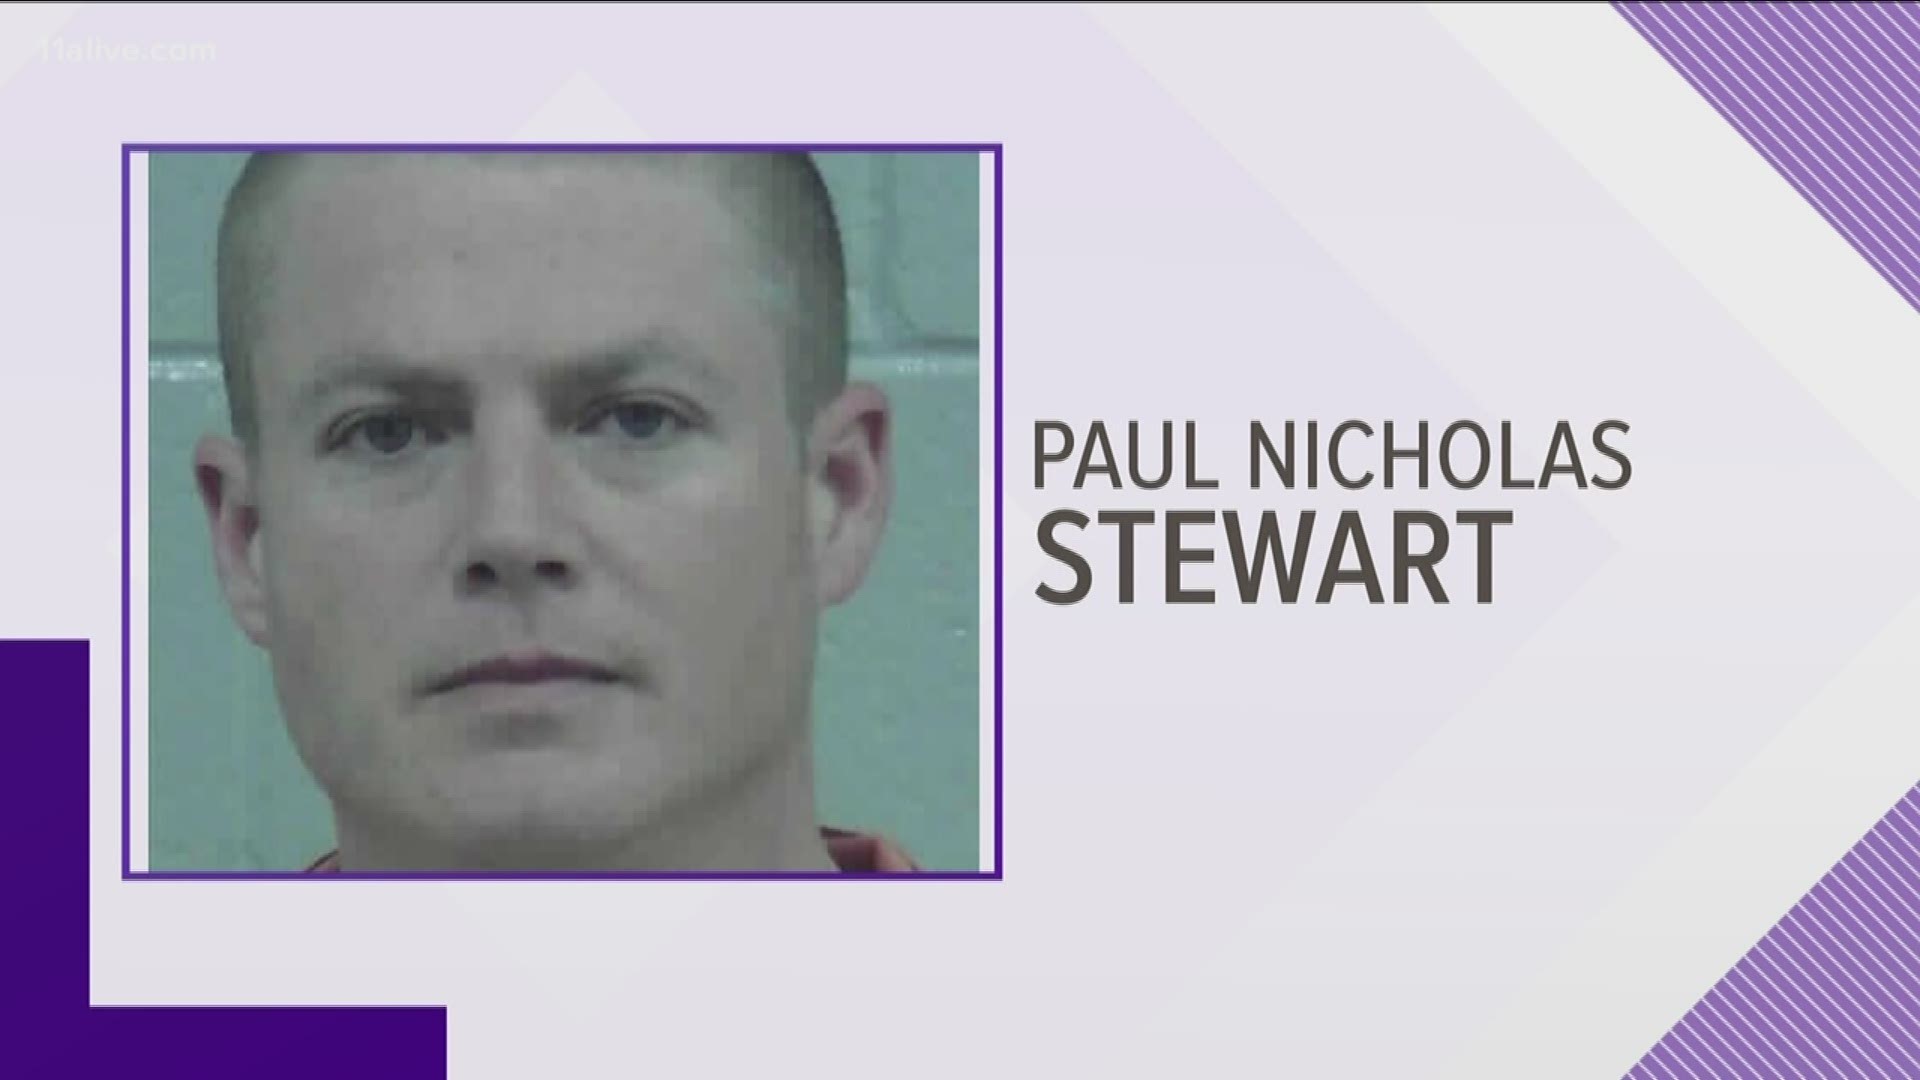 The Butts County Sheriff's Office arrested Paul Nicholas Stewart on Friday alleging he was involved in a drug deal while wearing his sheriff's office insignia.